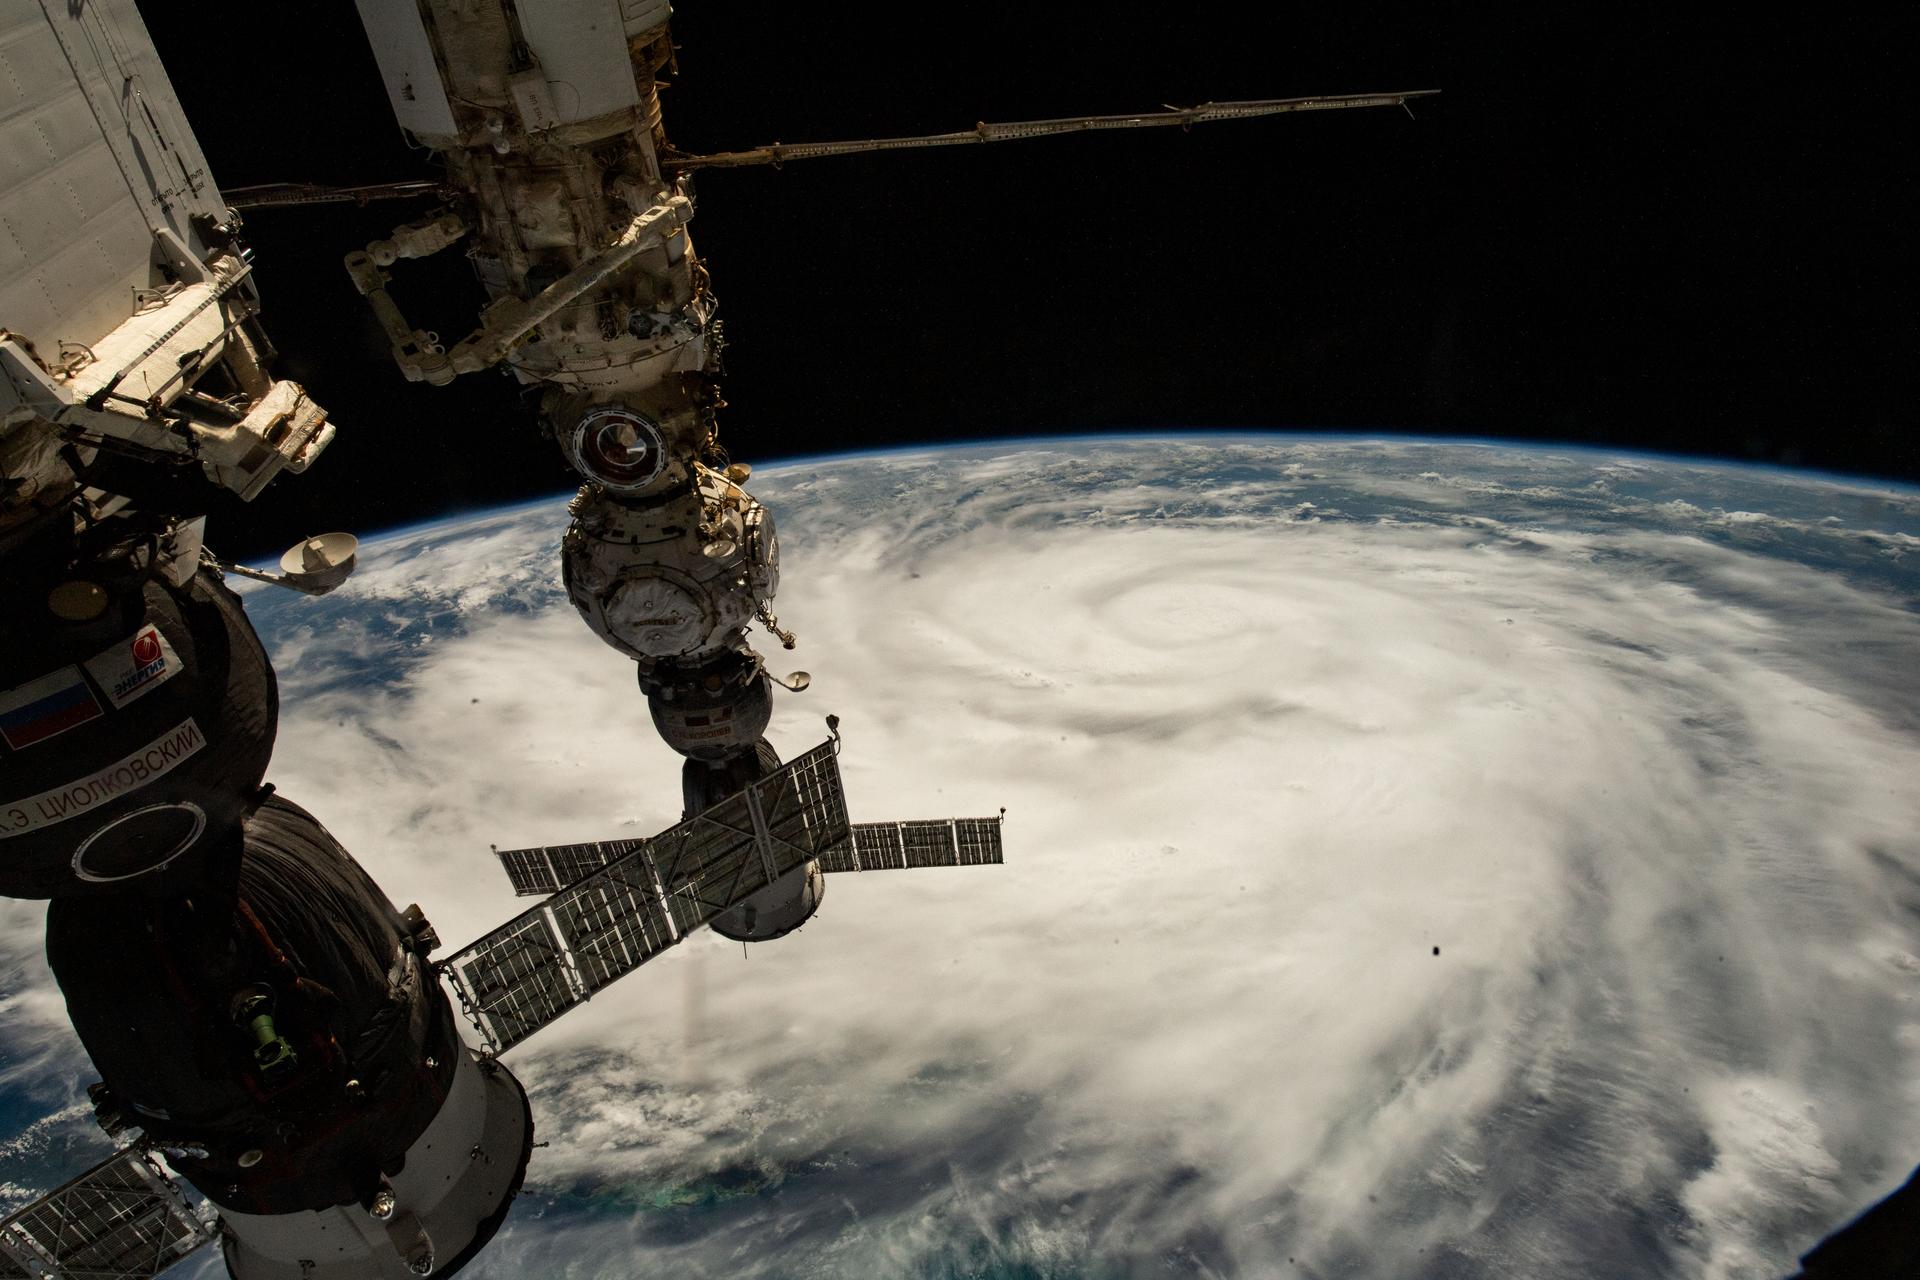 Hurricane Ian as seen from the International Space Station on 26 September, 2022